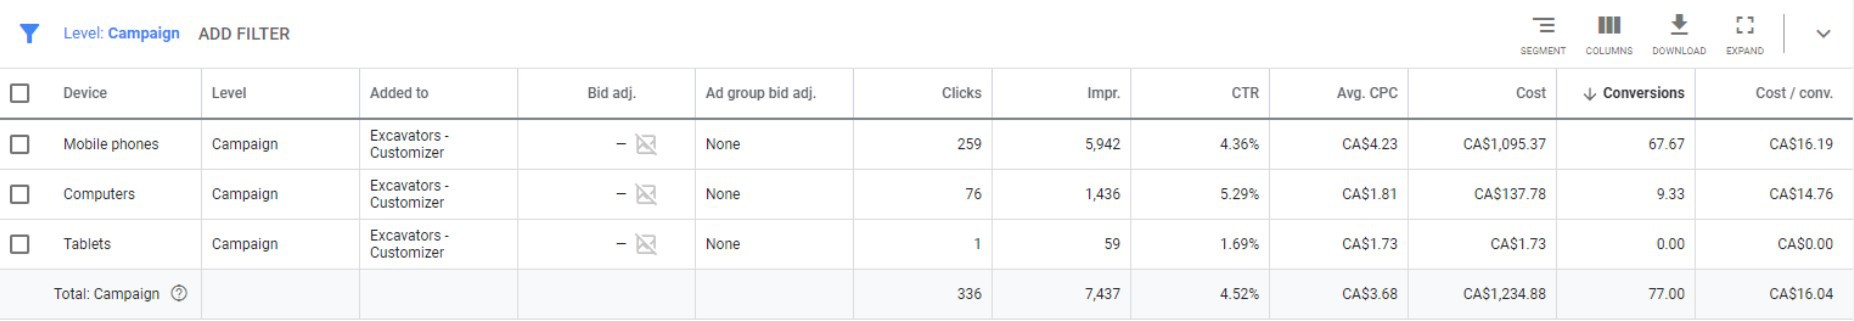 Viewing Google Ads campaign metrics by device